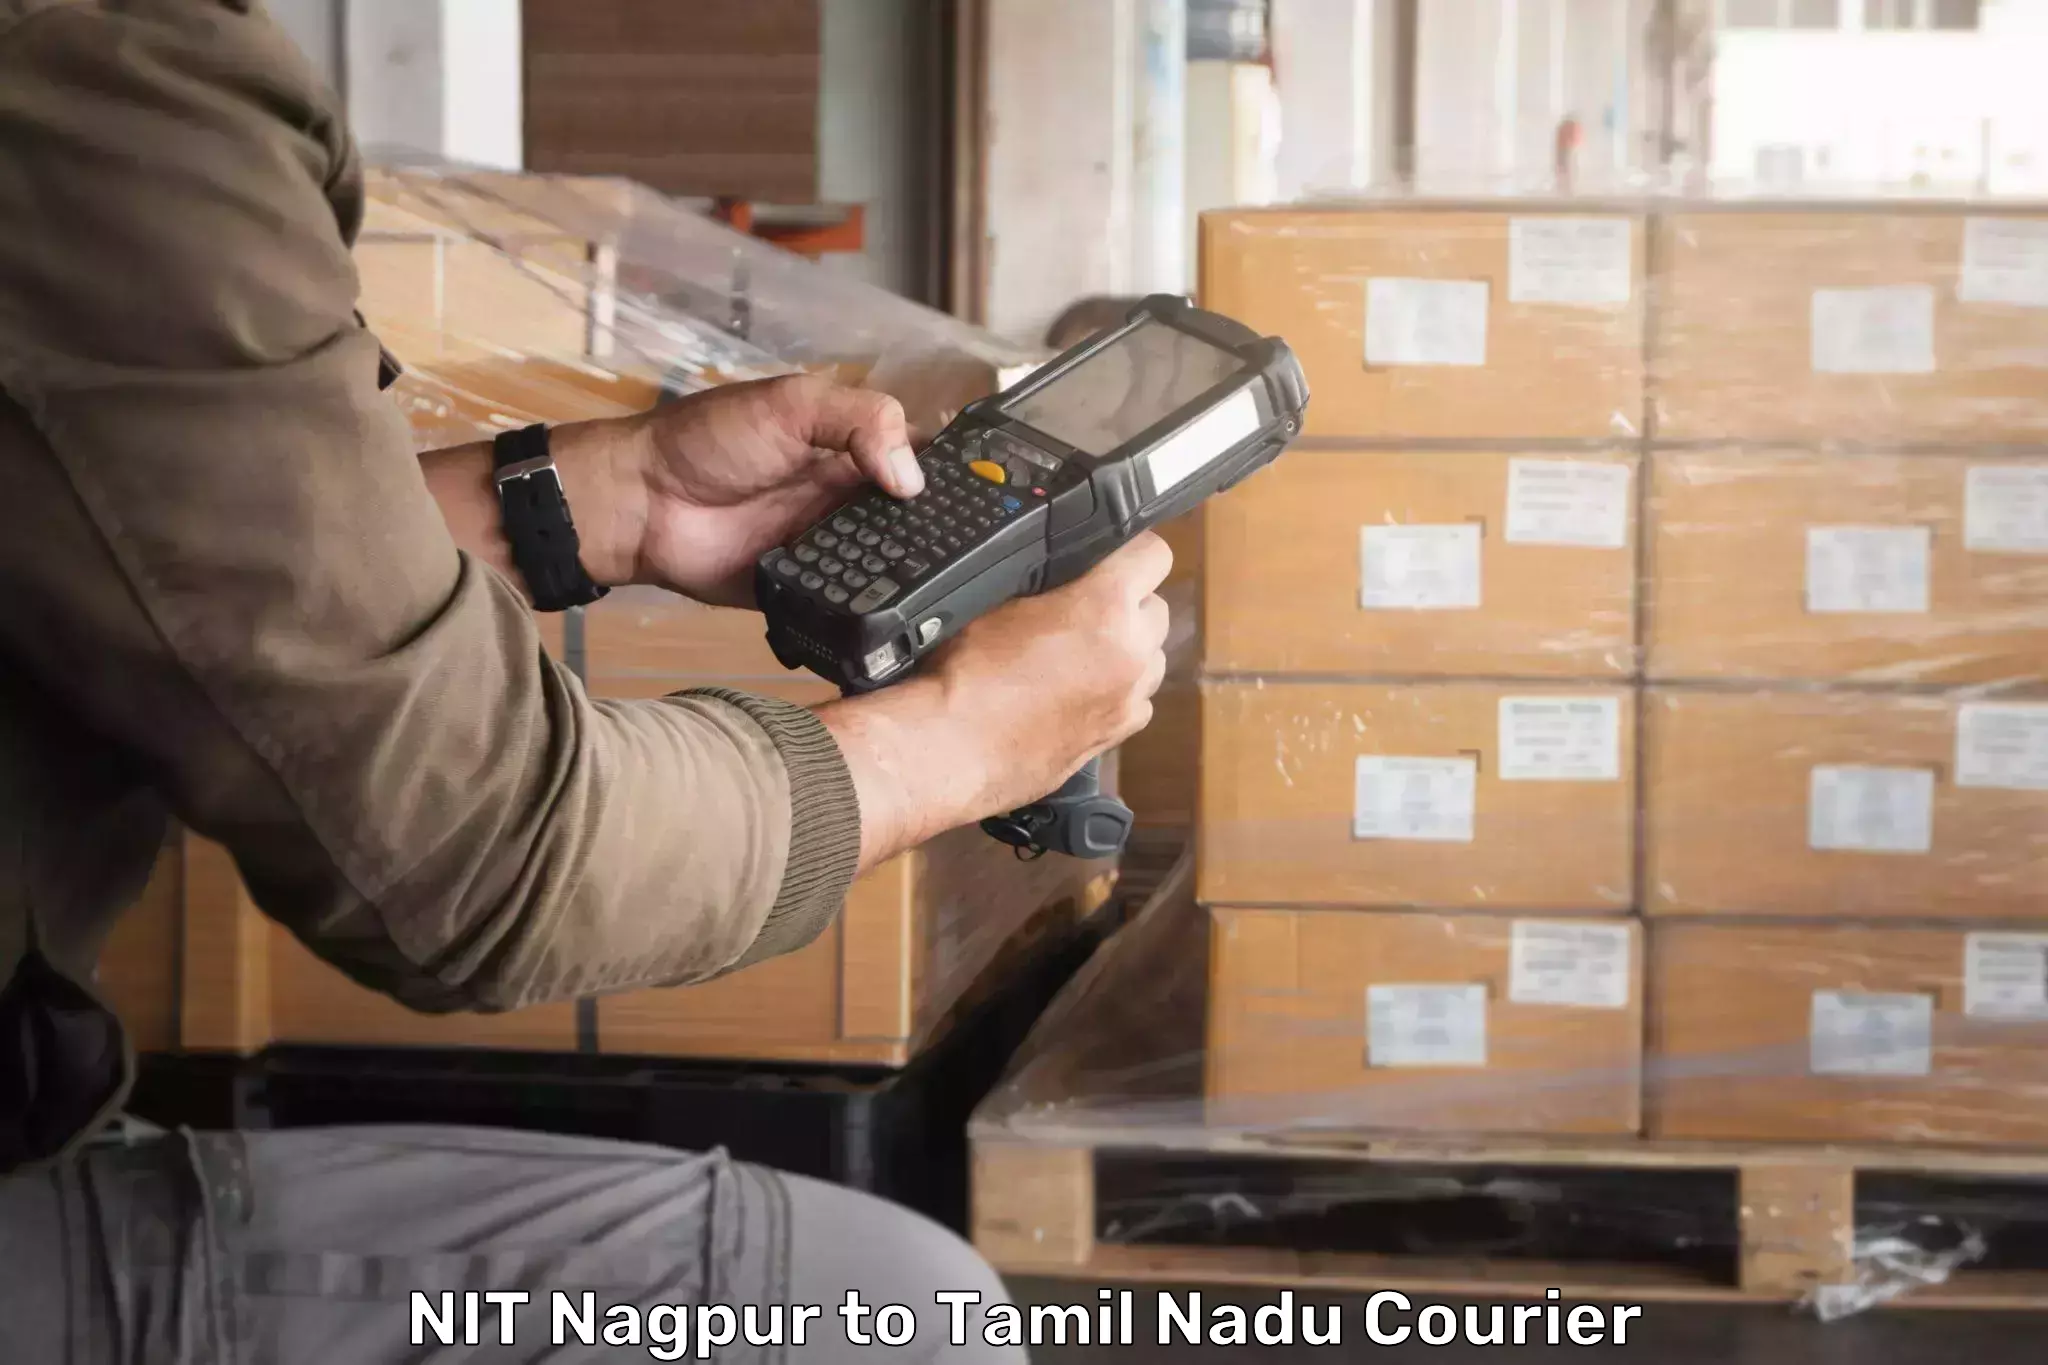 Personal courier services NIT Nagpur to Kudankulam